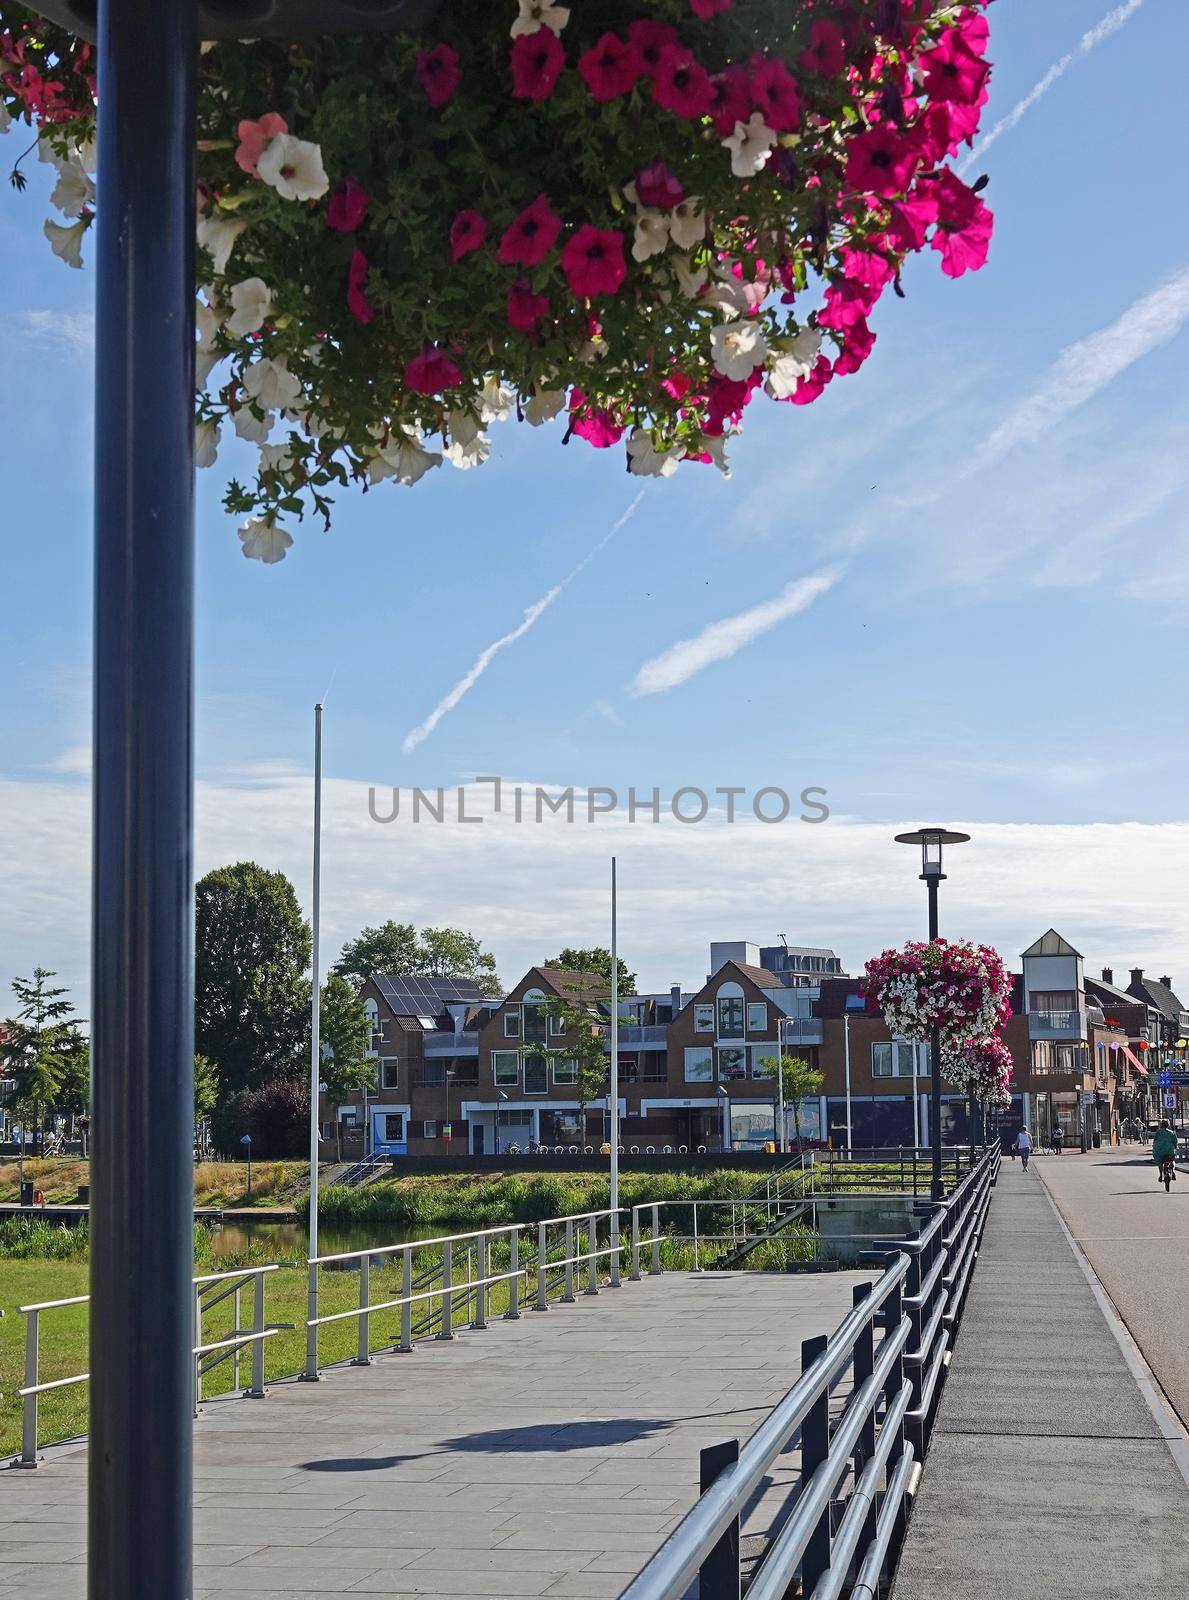 July 17 2022 Hardenberg - Netherlands Flower baskets on the lampposts on a bridge in the Dutch town Hardenberg. The baskets contain pink and white petunias and pink geraniums. In the distance a row of houses and some people.